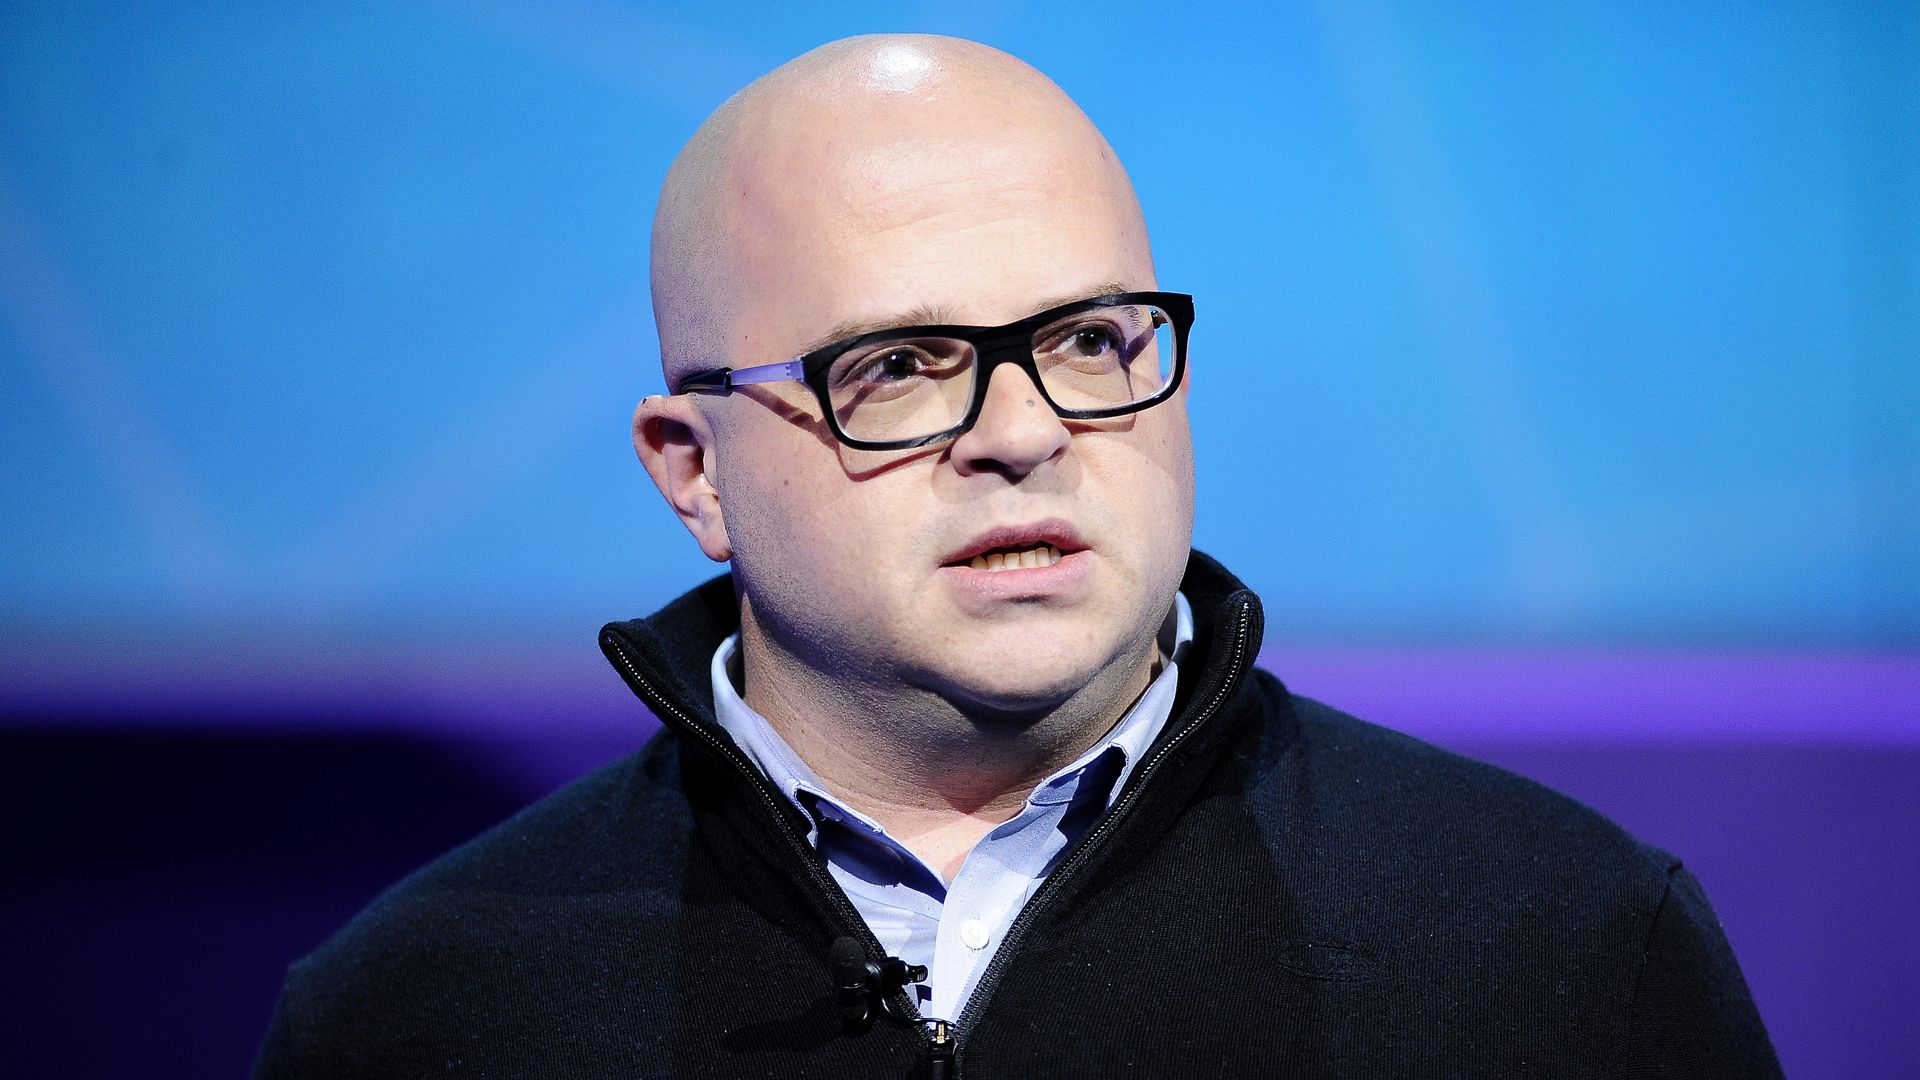 Jeff Lawson, founder, CEO and chairman of Twilio talking on a stage with blue back lighting